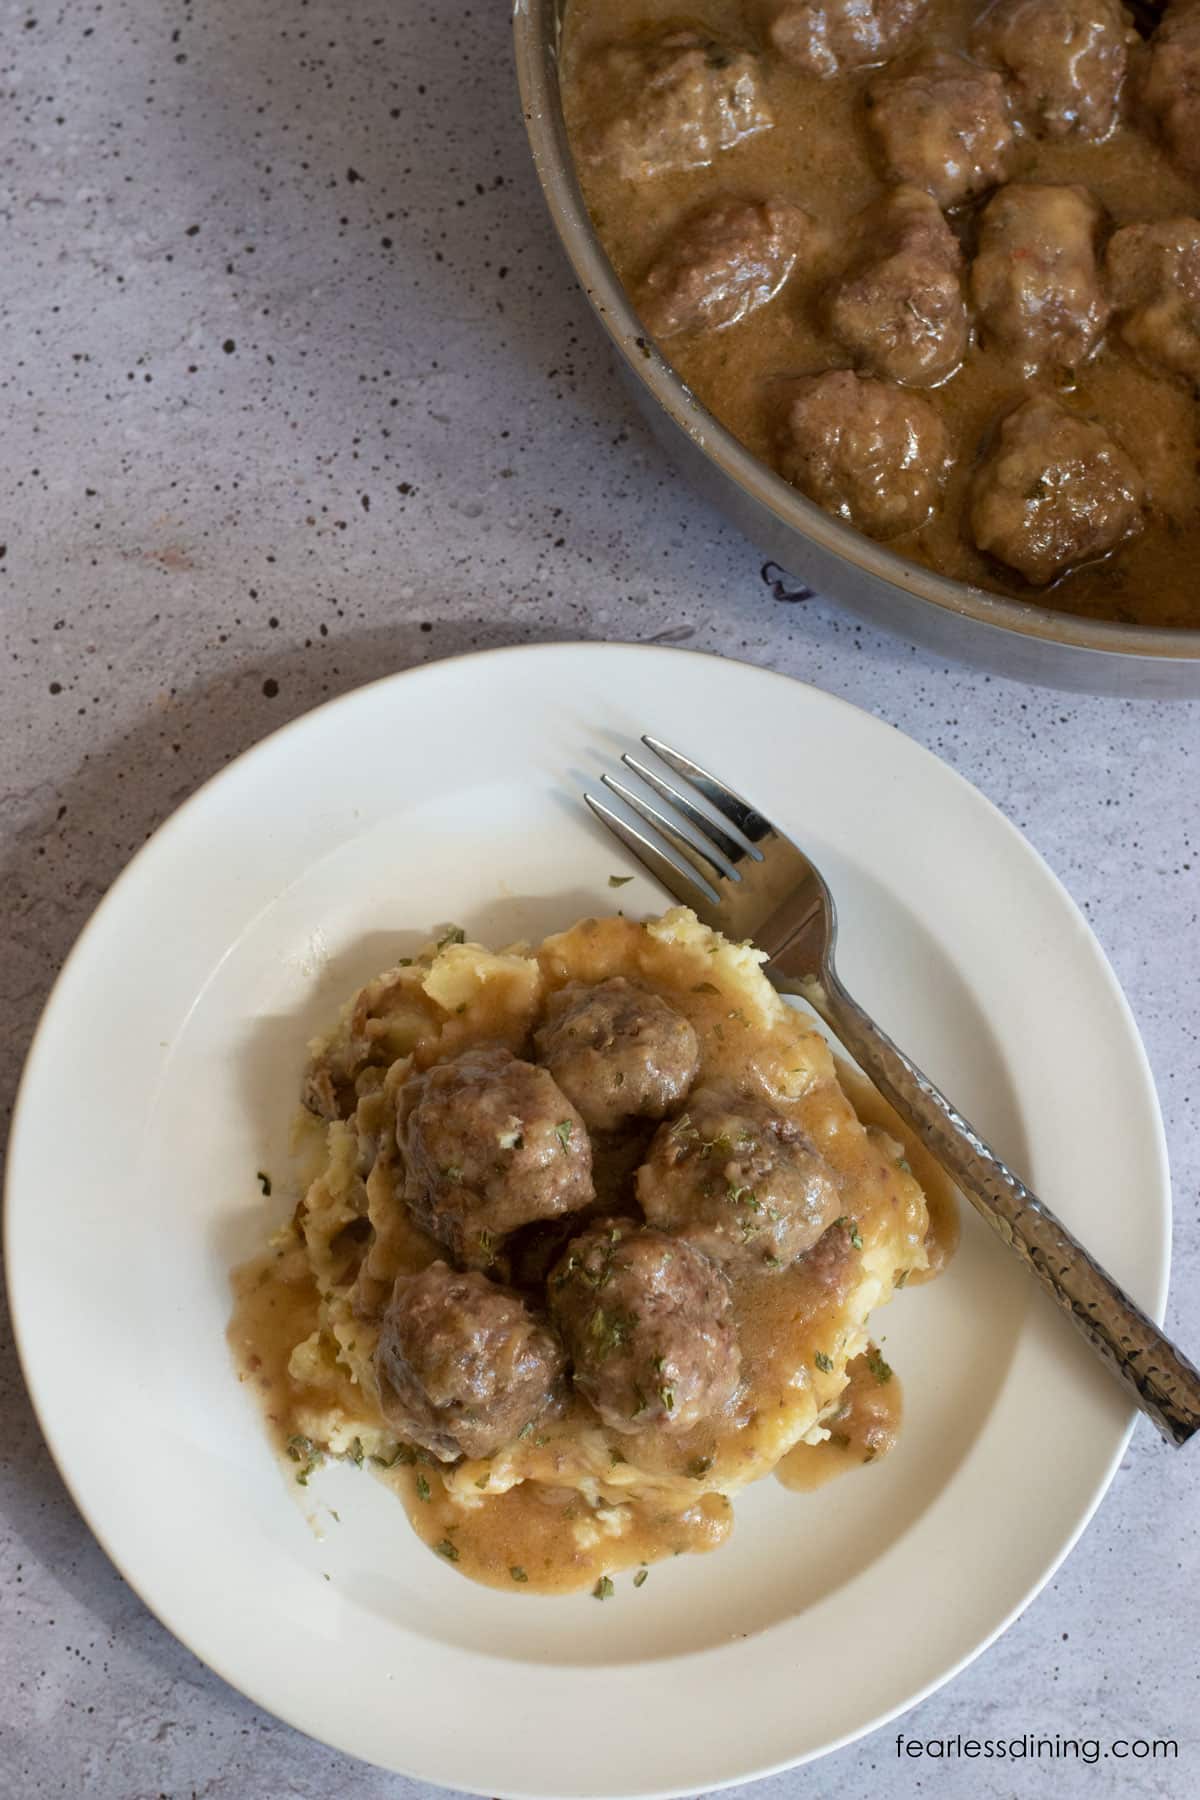 The top view of a plate full of mashed potatoes and Swedish meatballs.